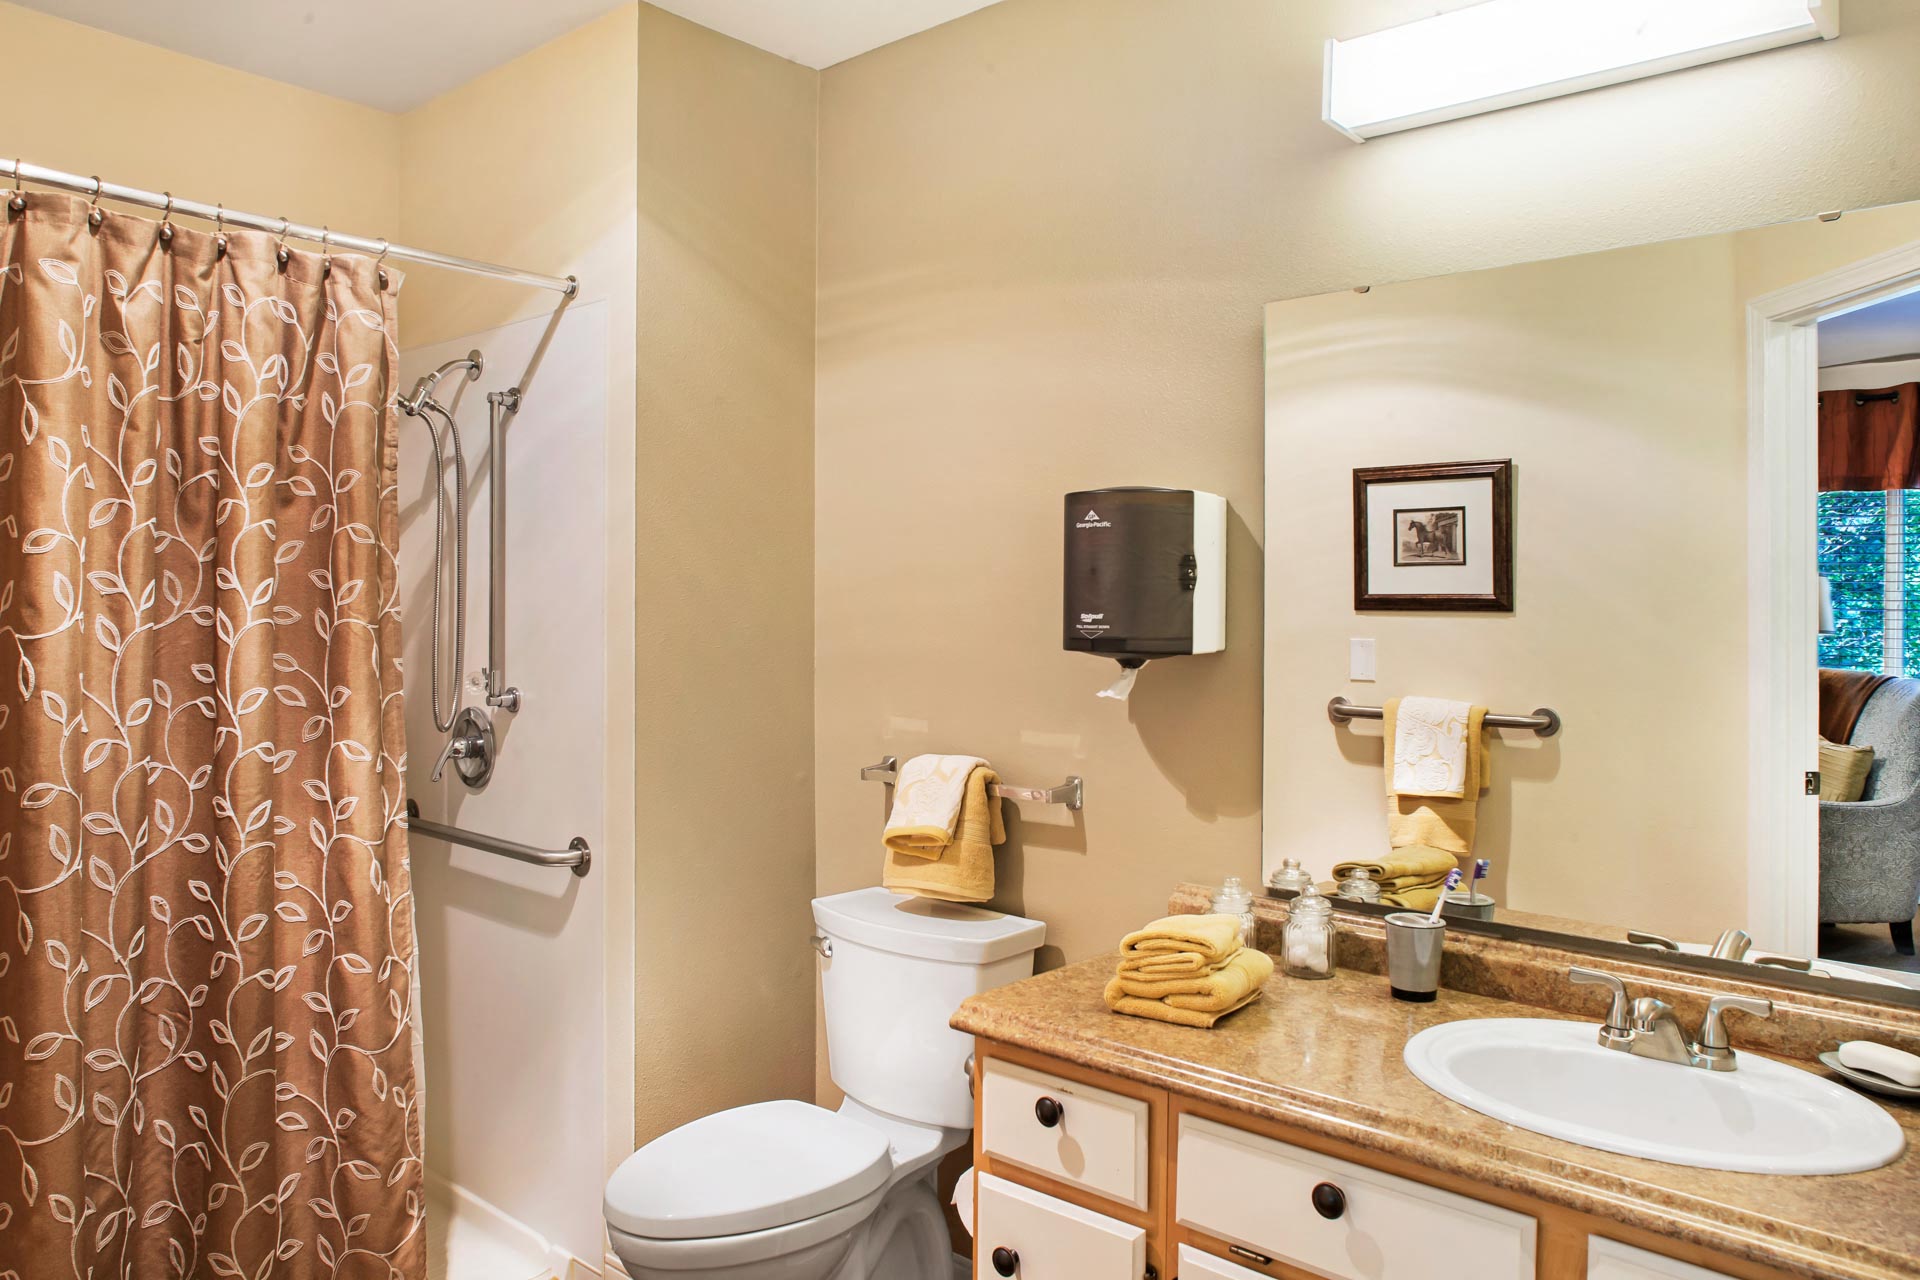 Luxurious Bathrooms at Cogir of Northgate Memory Care, Seattle, WA